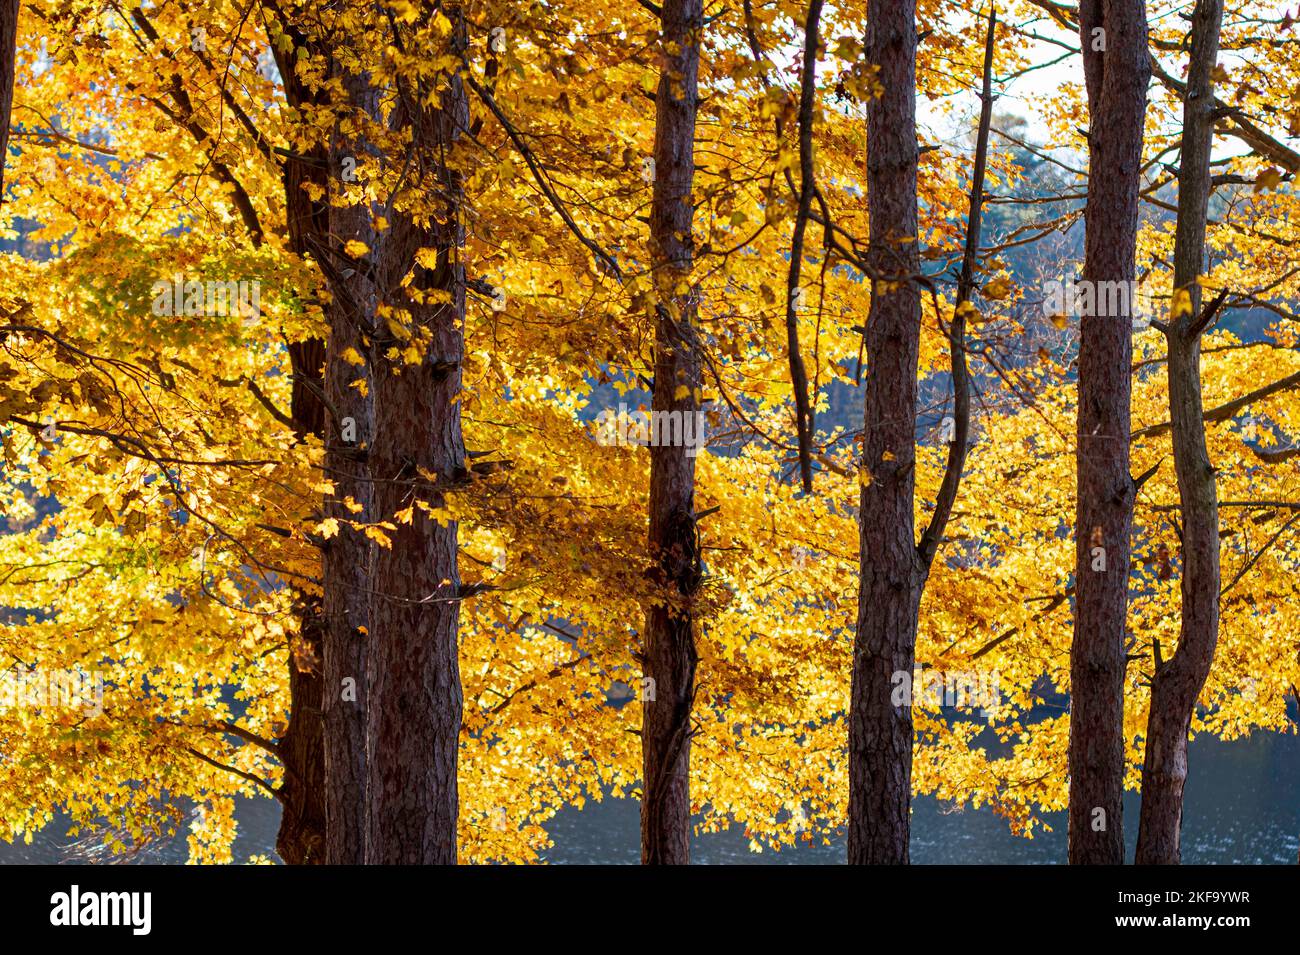 Autumn background of trees with backlit yellow leaves. Stock Photo